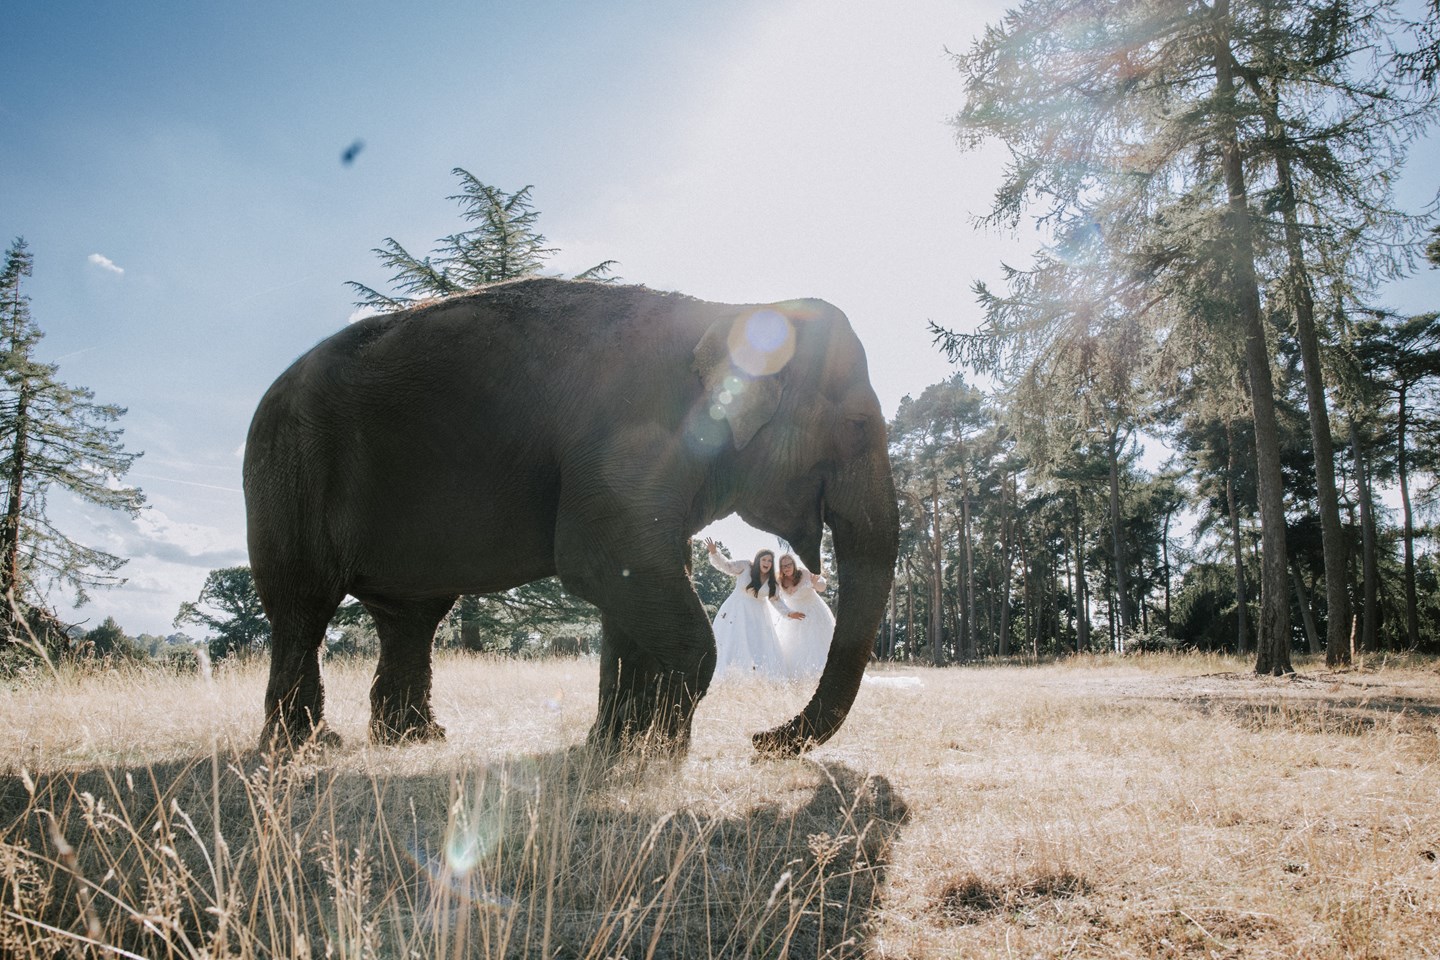 Two brides pose behind elephant in forest with no barriers between them on sunny day